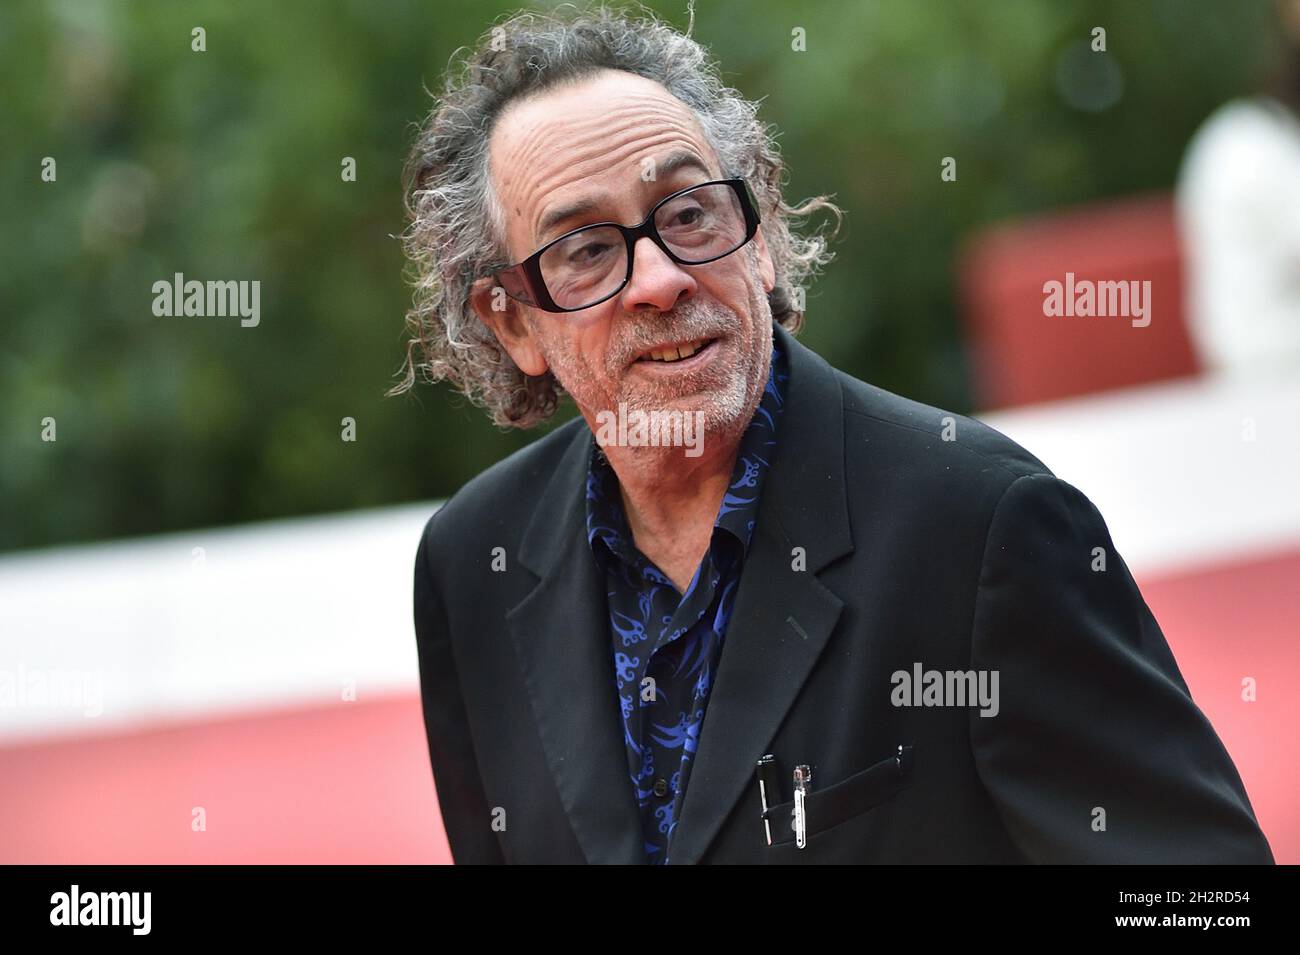 Rome, Italy. 23rd Oct, 2021. Tim Burton attends the Tim Burton Close  Encounter red carpet during the 16th Rome Film Fest 2021 on Saturday,  October 23, 2021 in Rome, Italy. Photo by